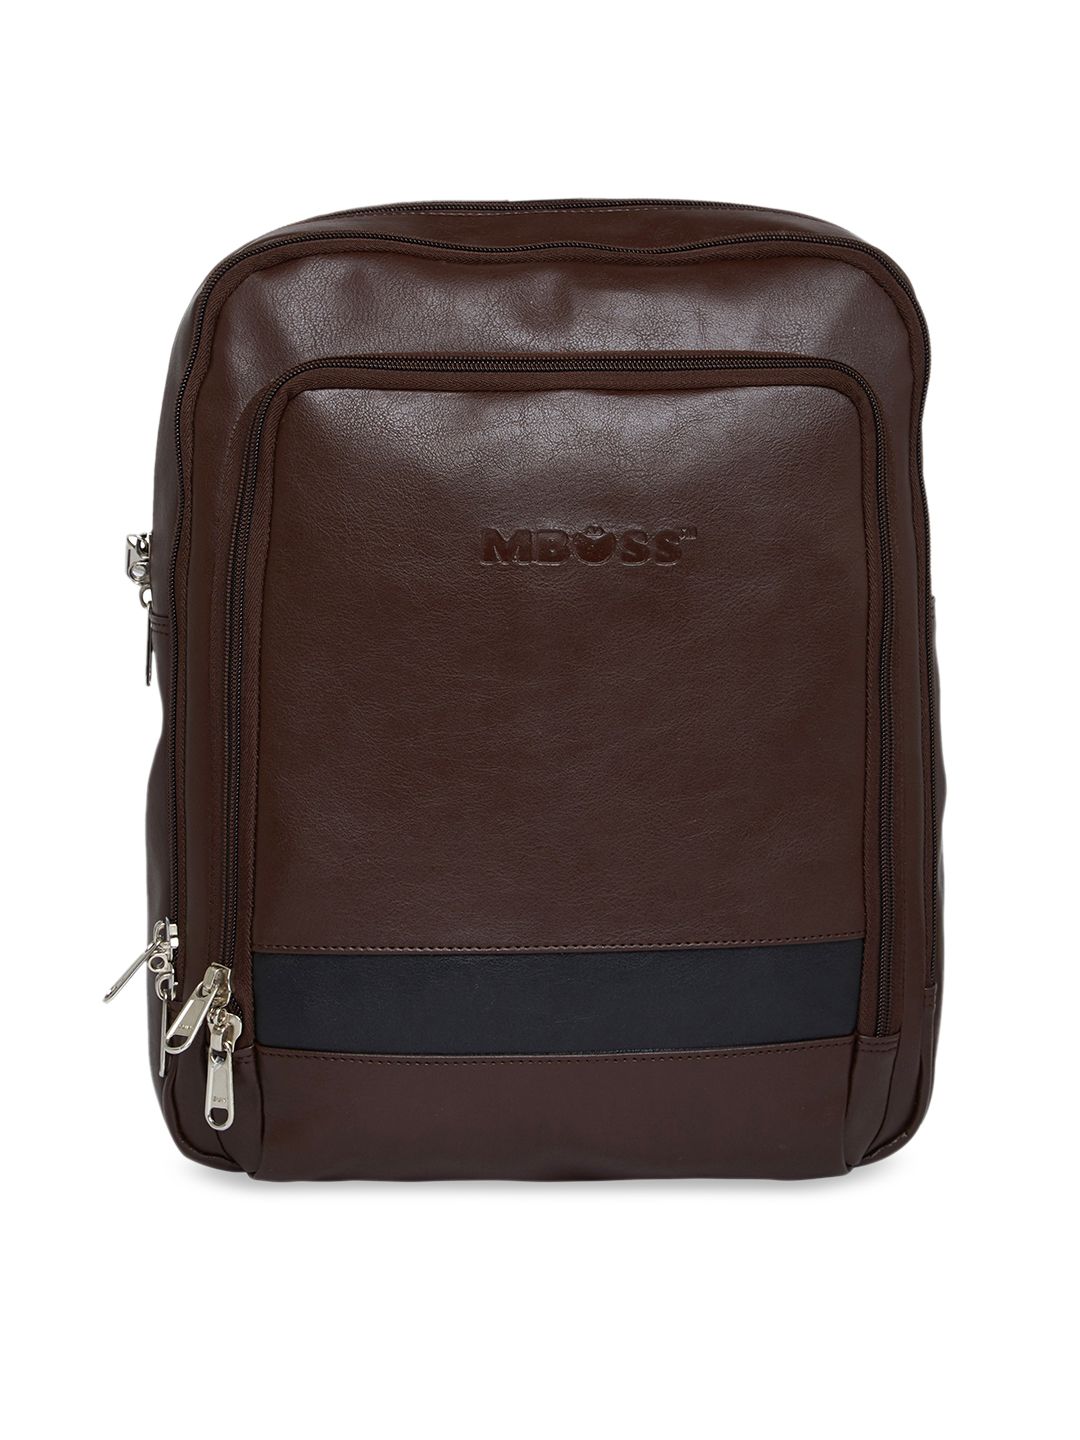 MBOSS Unisex Brown Solid Backpack Price in India